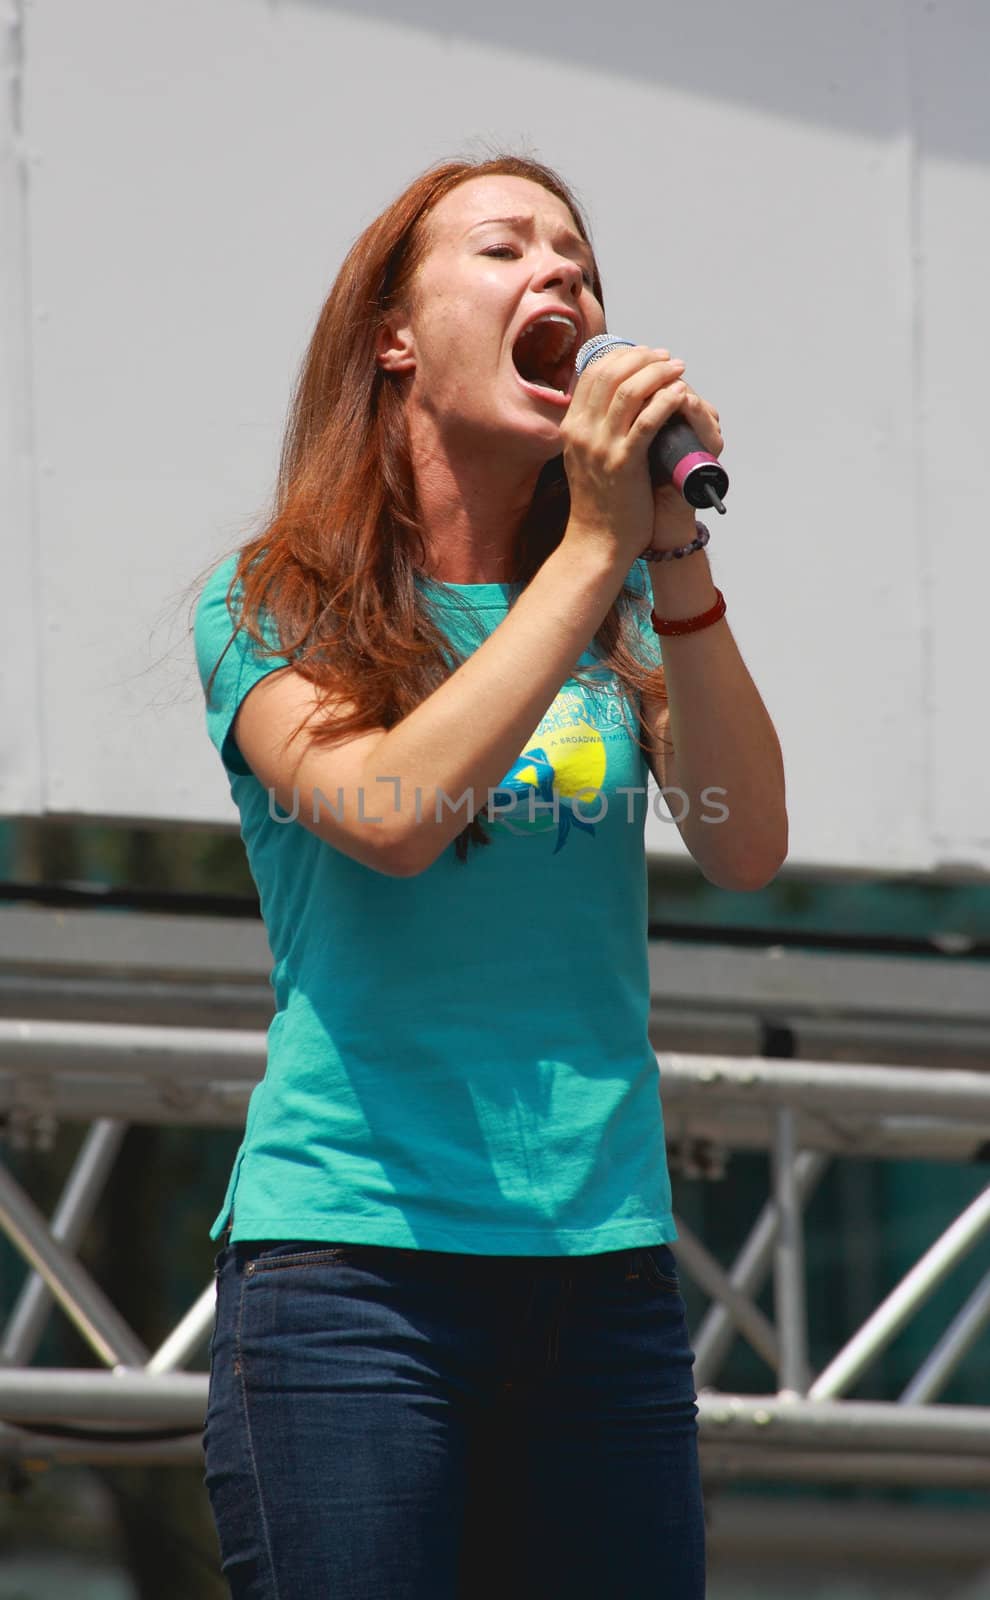 NEW YORK - JULY 31:  Actress Sierra Boggess performed In The Little Mermaid at The Broadway in Bryant Park in NYC - a free public event on July 31, 2008  